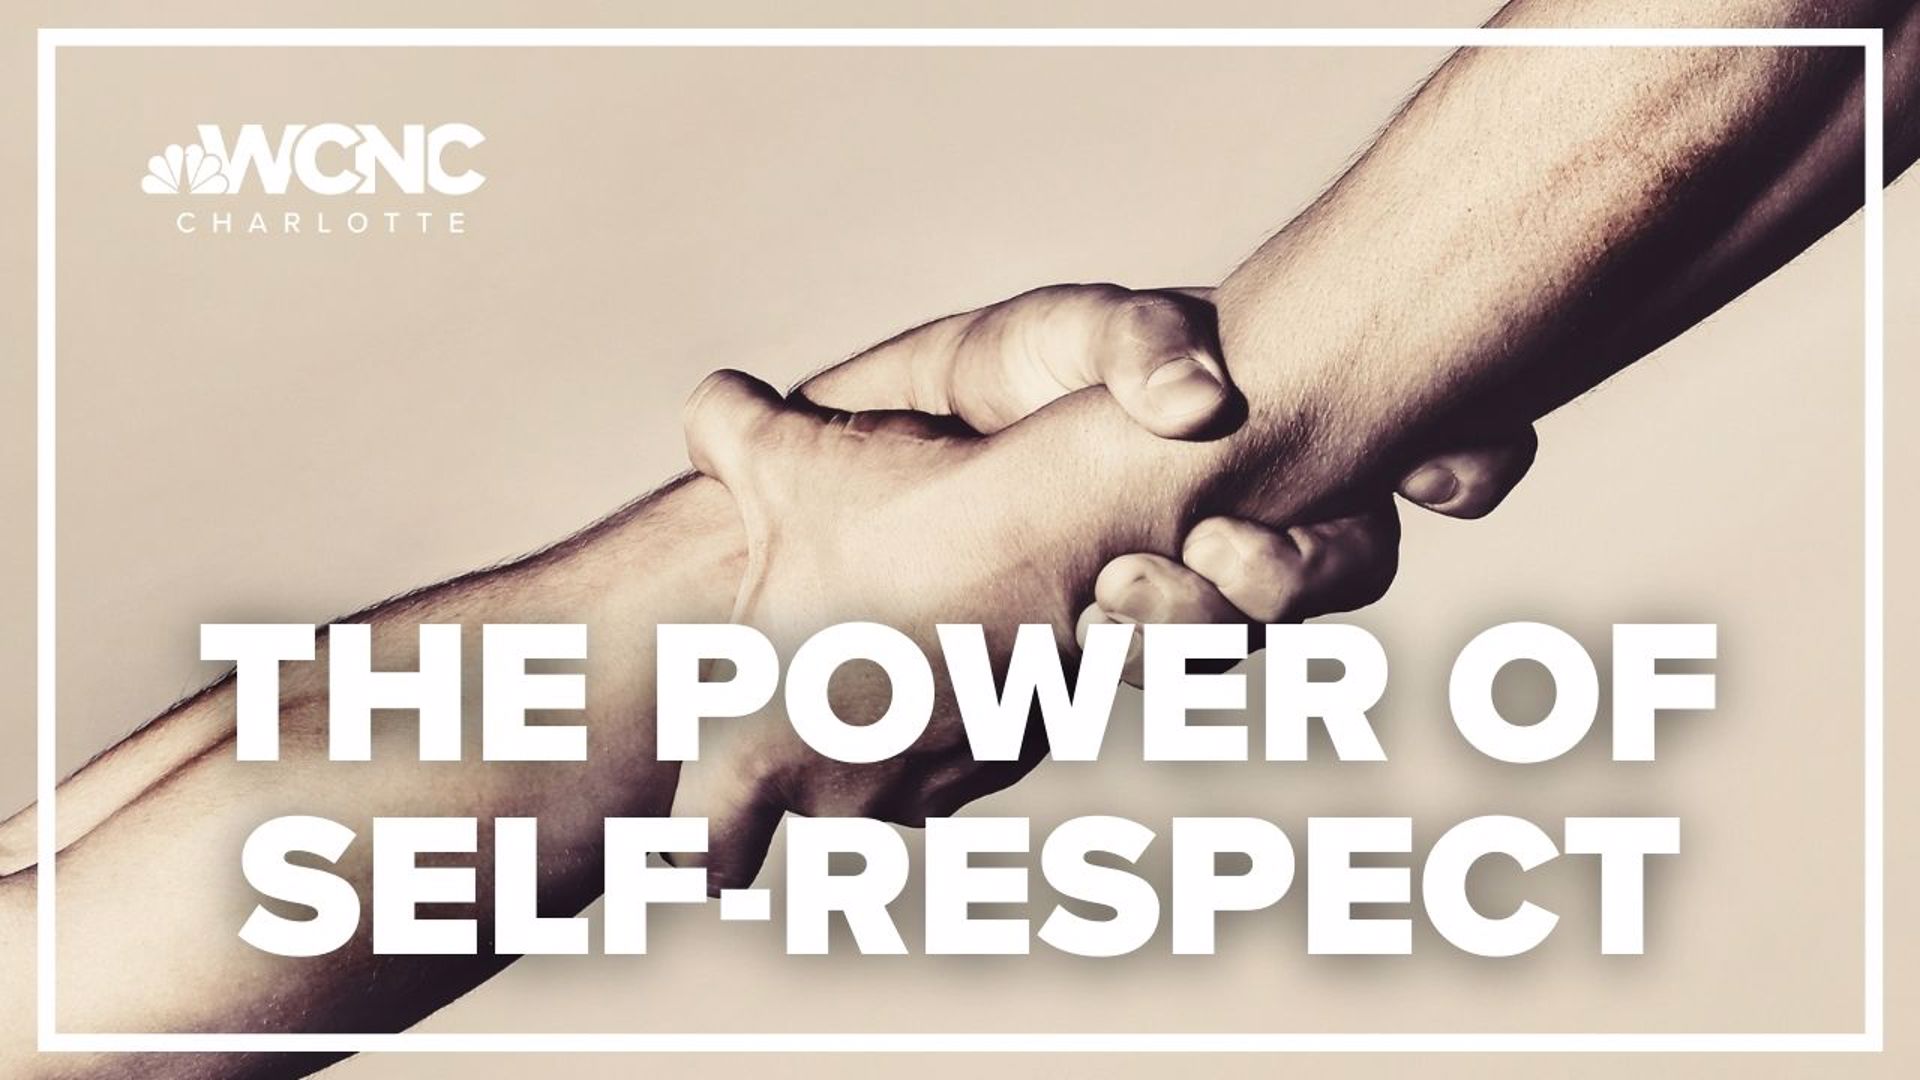 All of us want respect, but how can we get people to respect us? Coach LaMonte explains how he gets people to treat him properly.